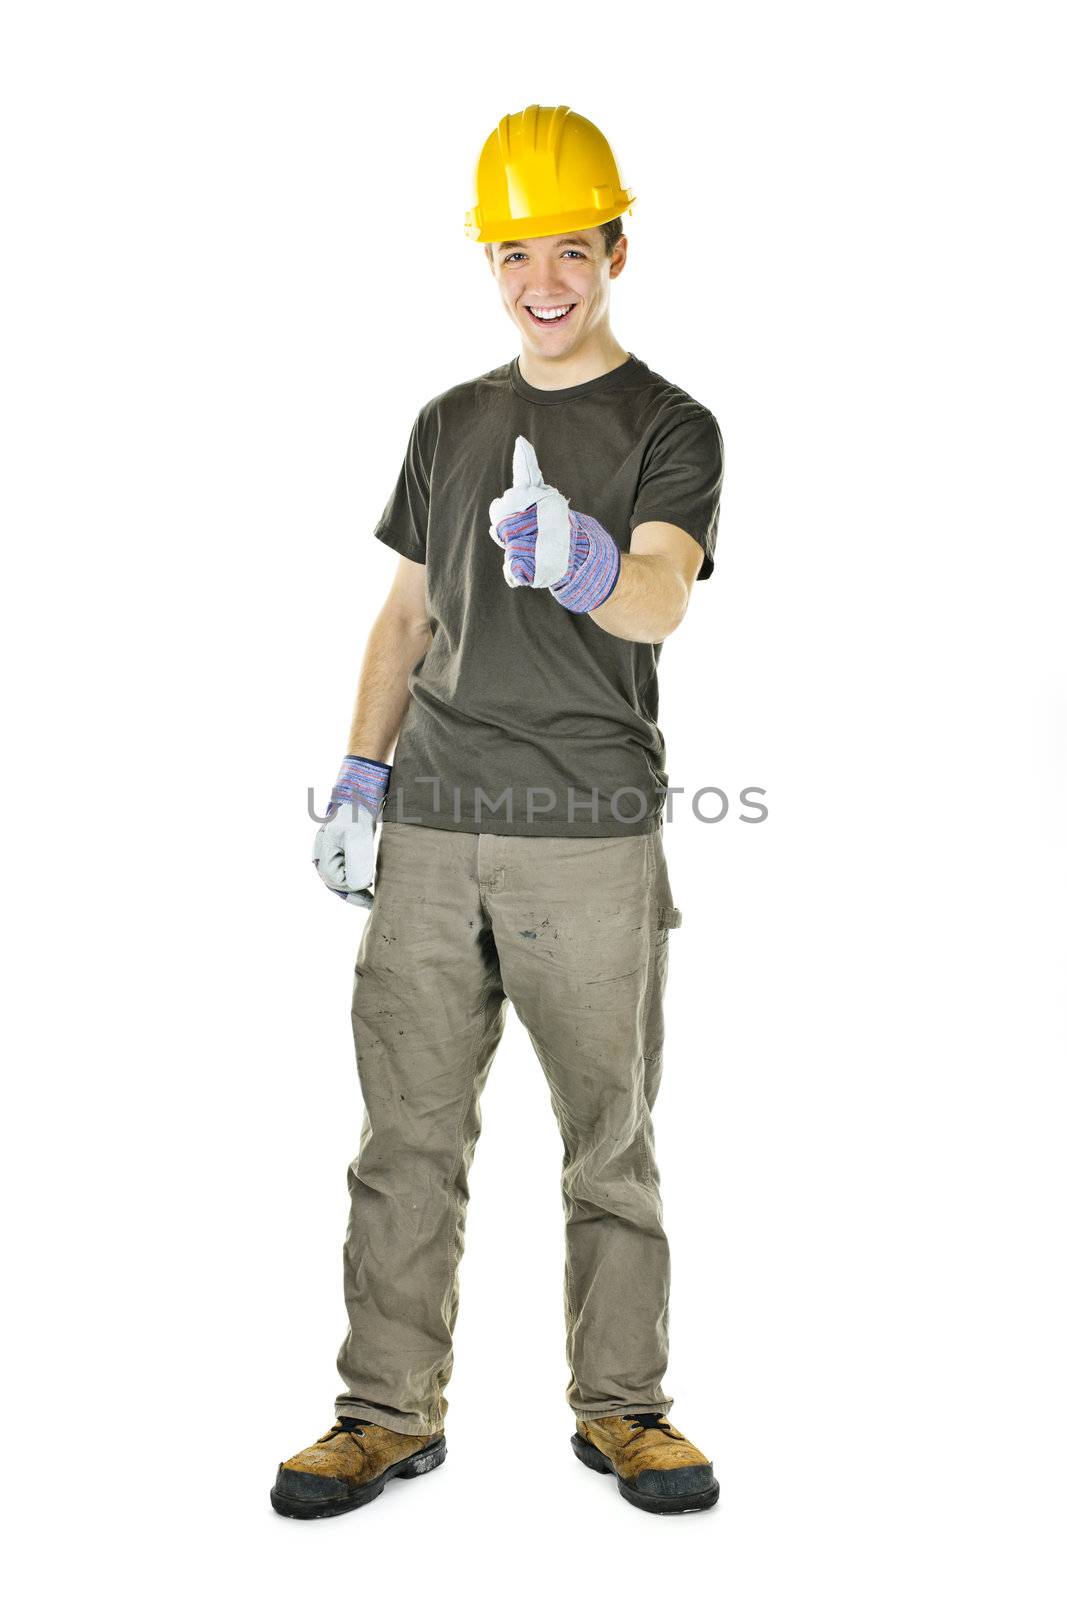 Smiling construction worker showing thumbs up isolated on white background